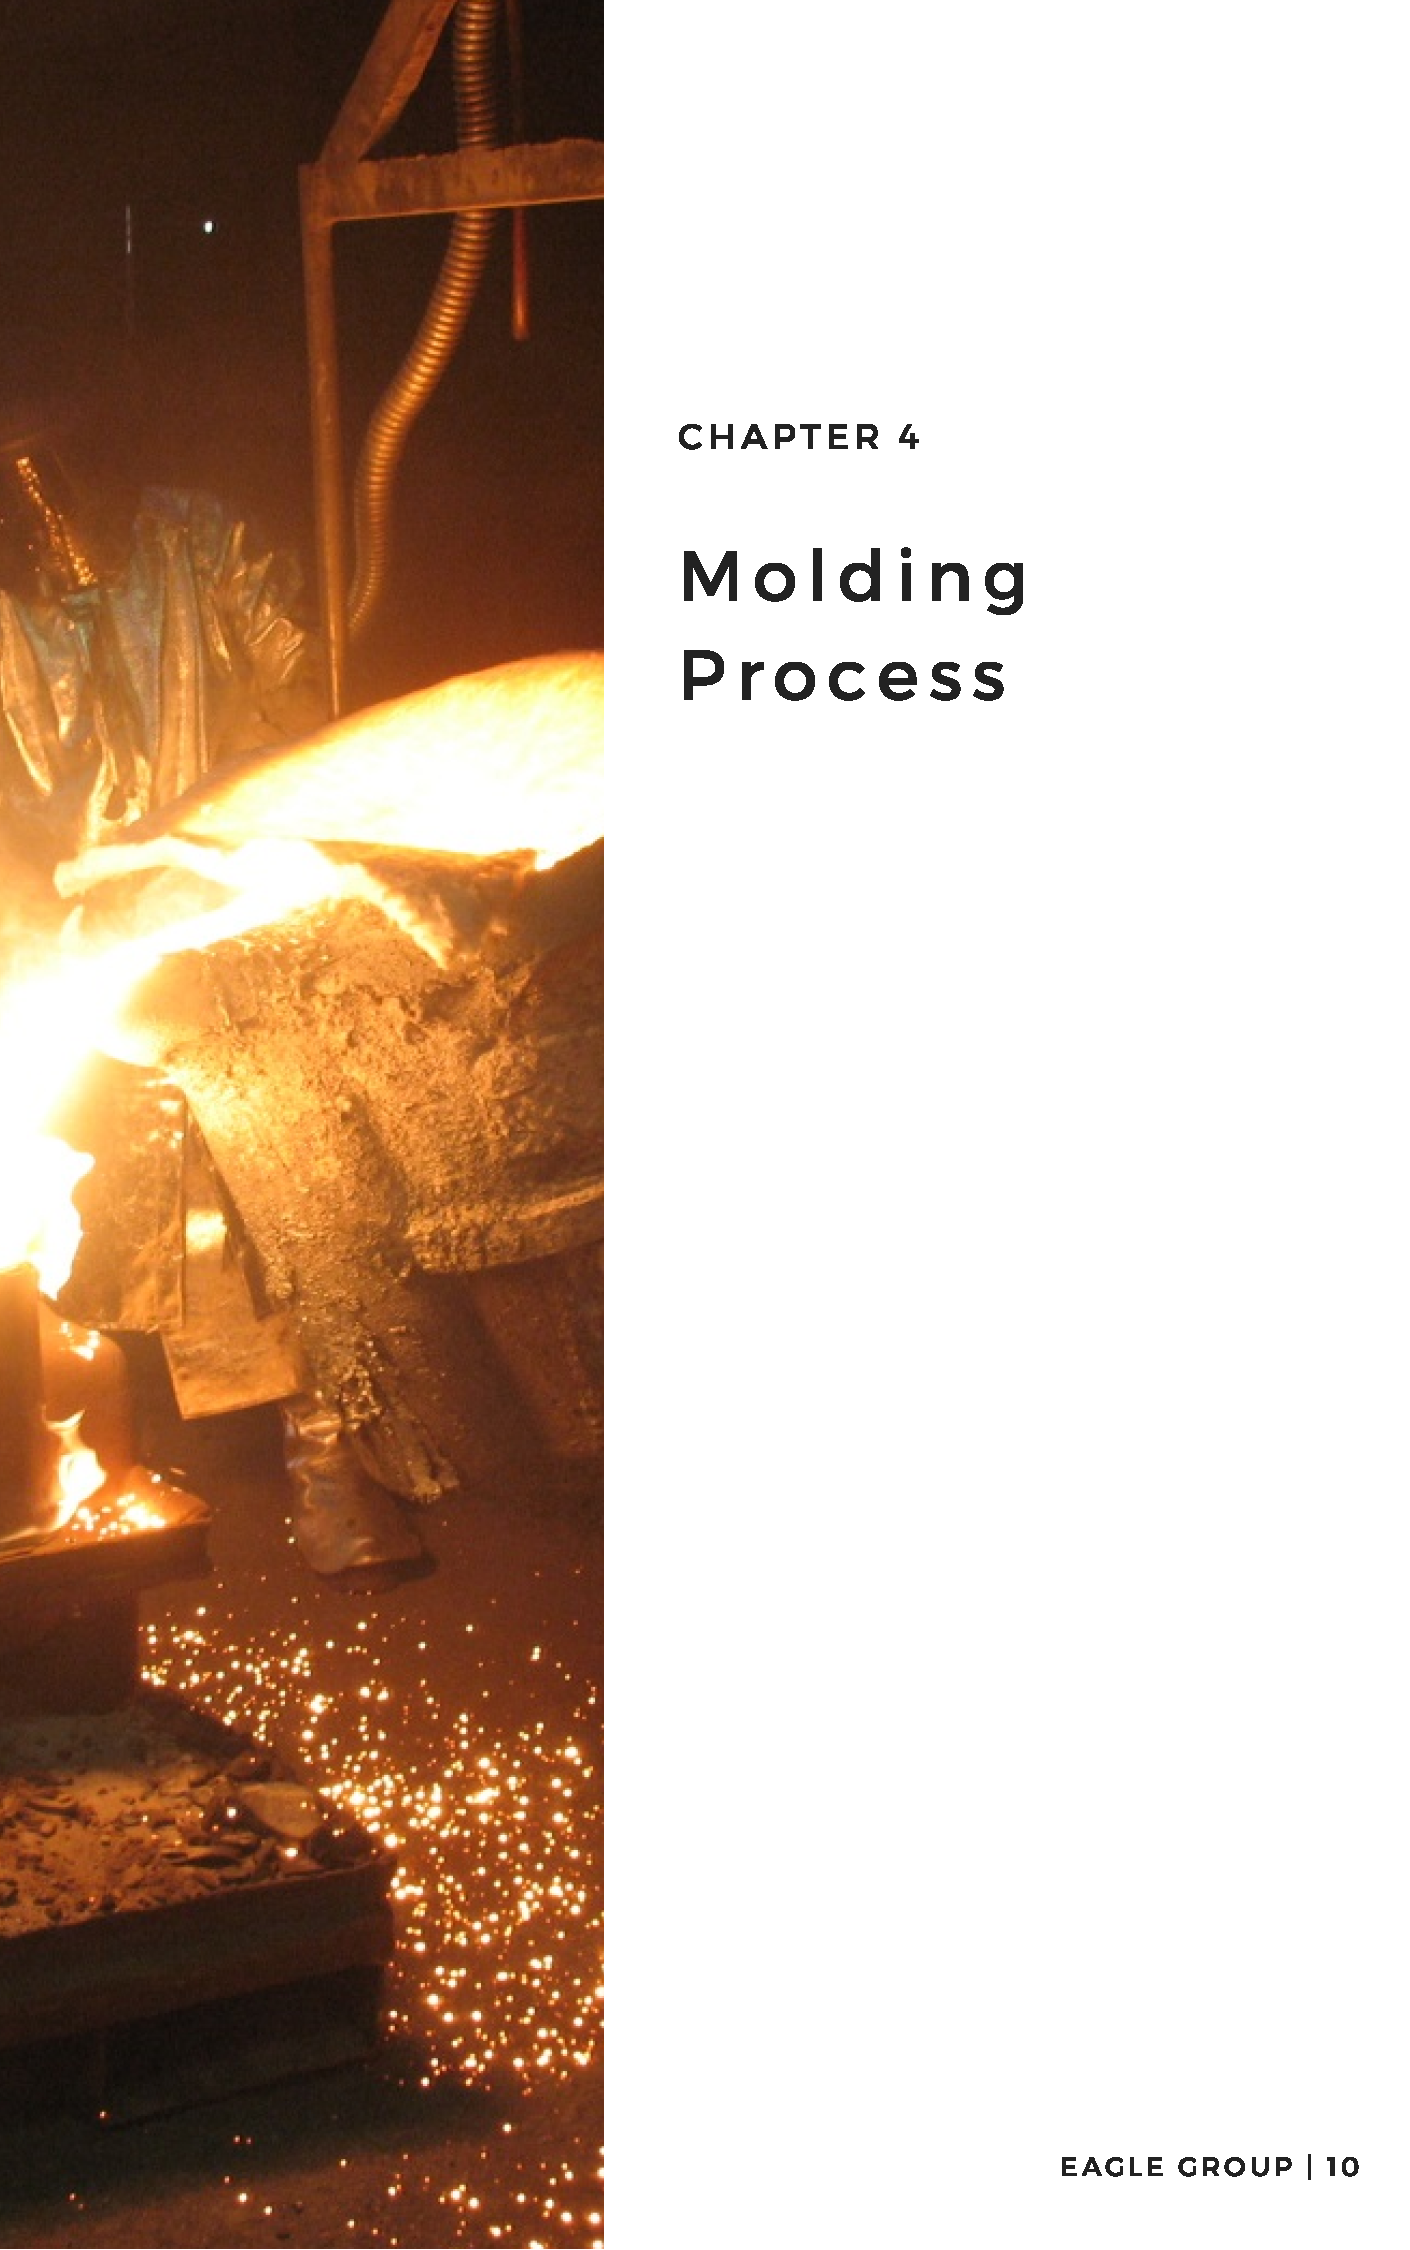 Shell Molding Process Guide- The Eagle Group(图10)